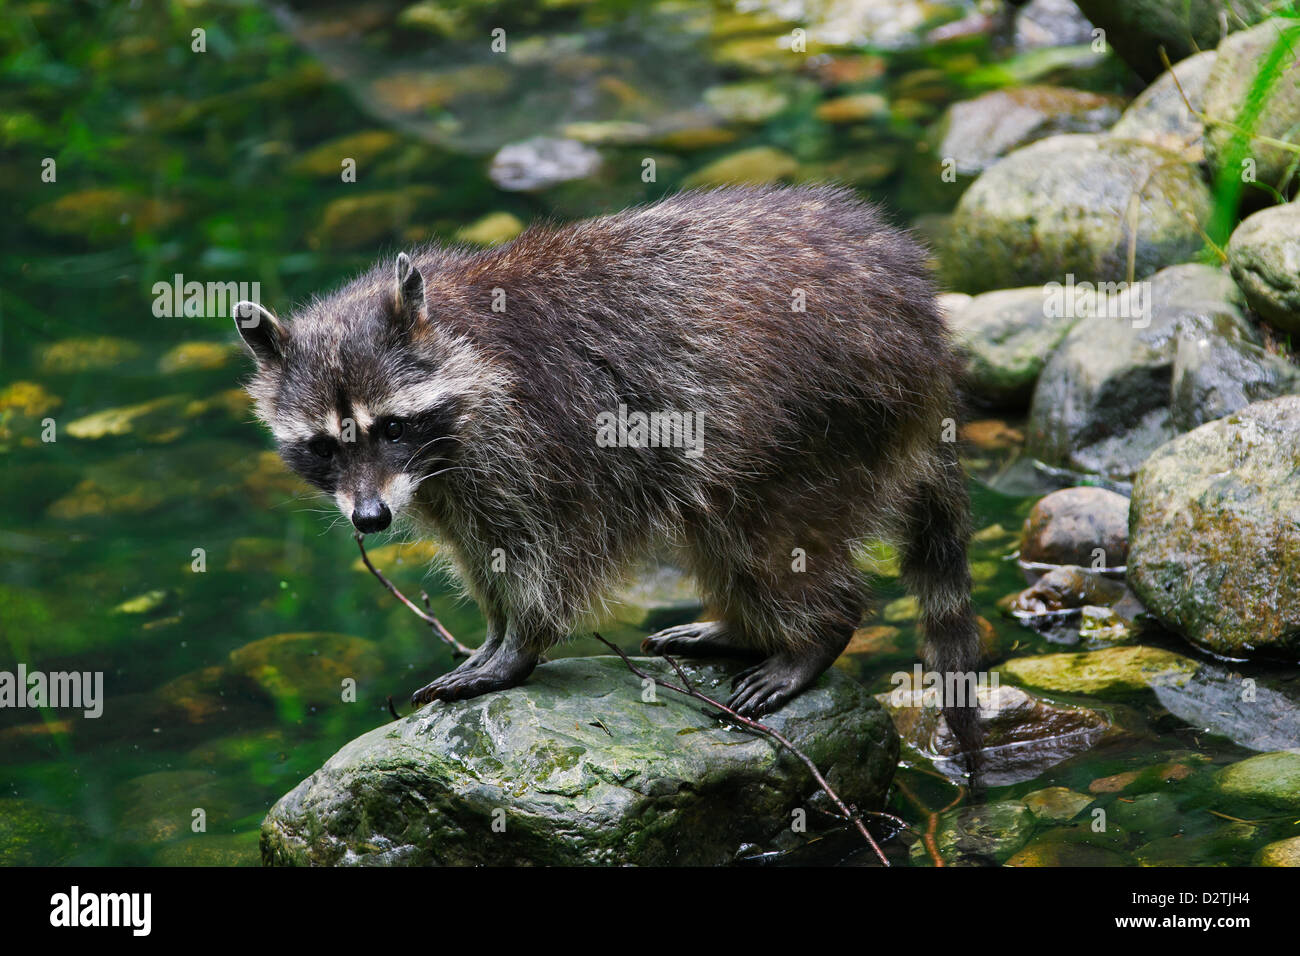 North American raccoon (Procyon lotor), native to North America, on river bank Stock Photo